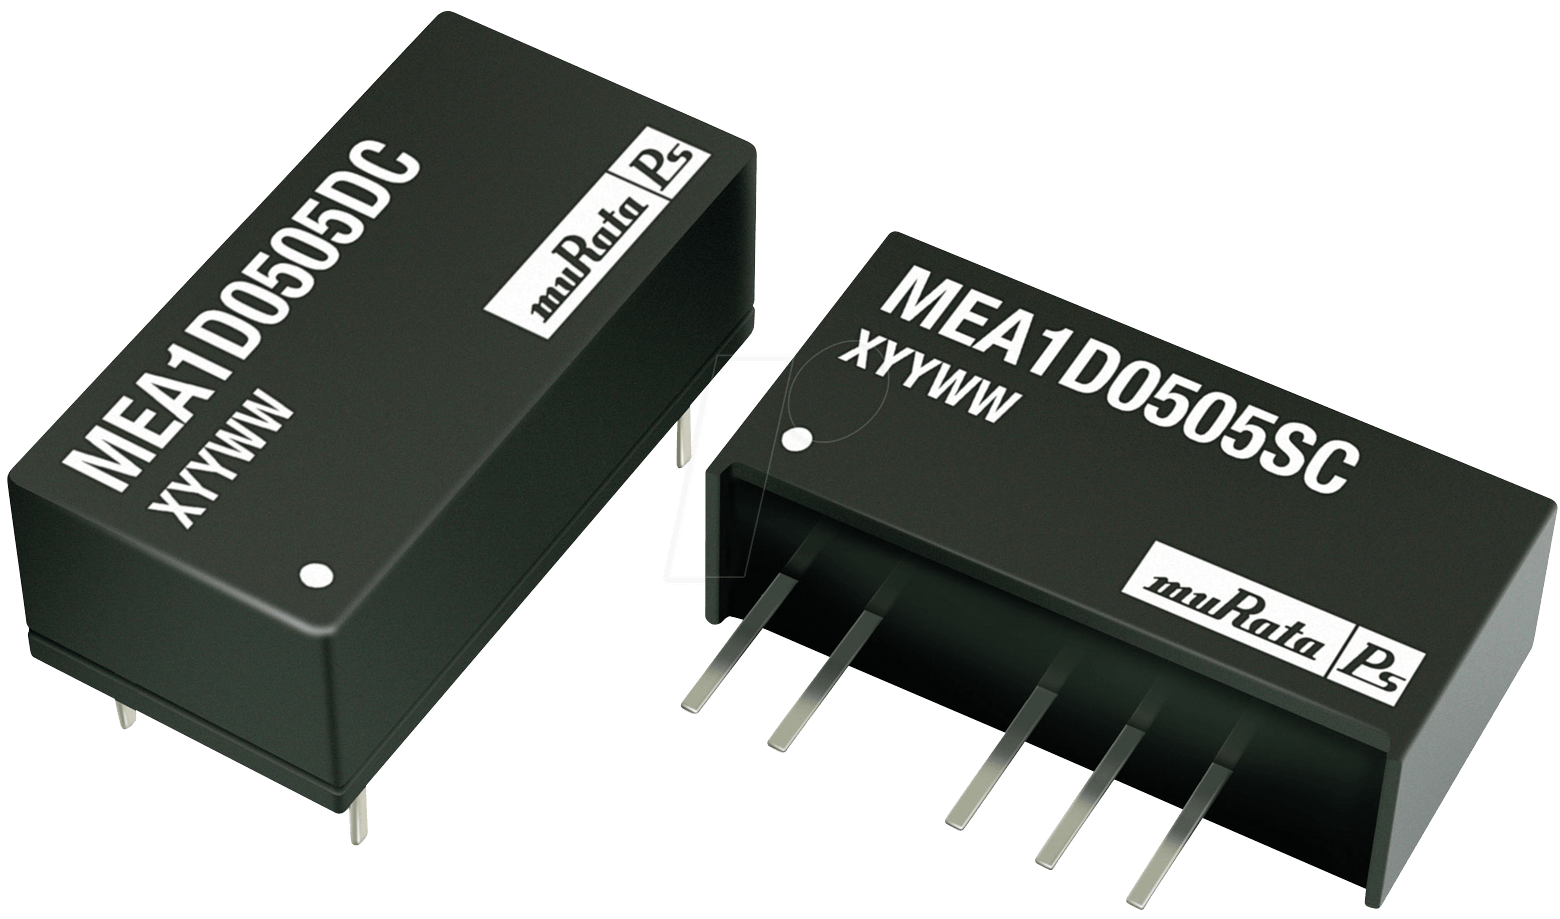 MEA1D0509SC - DC/DC-Wandler MEA, 1 W, 9 V, 56 mA, SIL, Dual von MURATA POWER SOLUTIONS